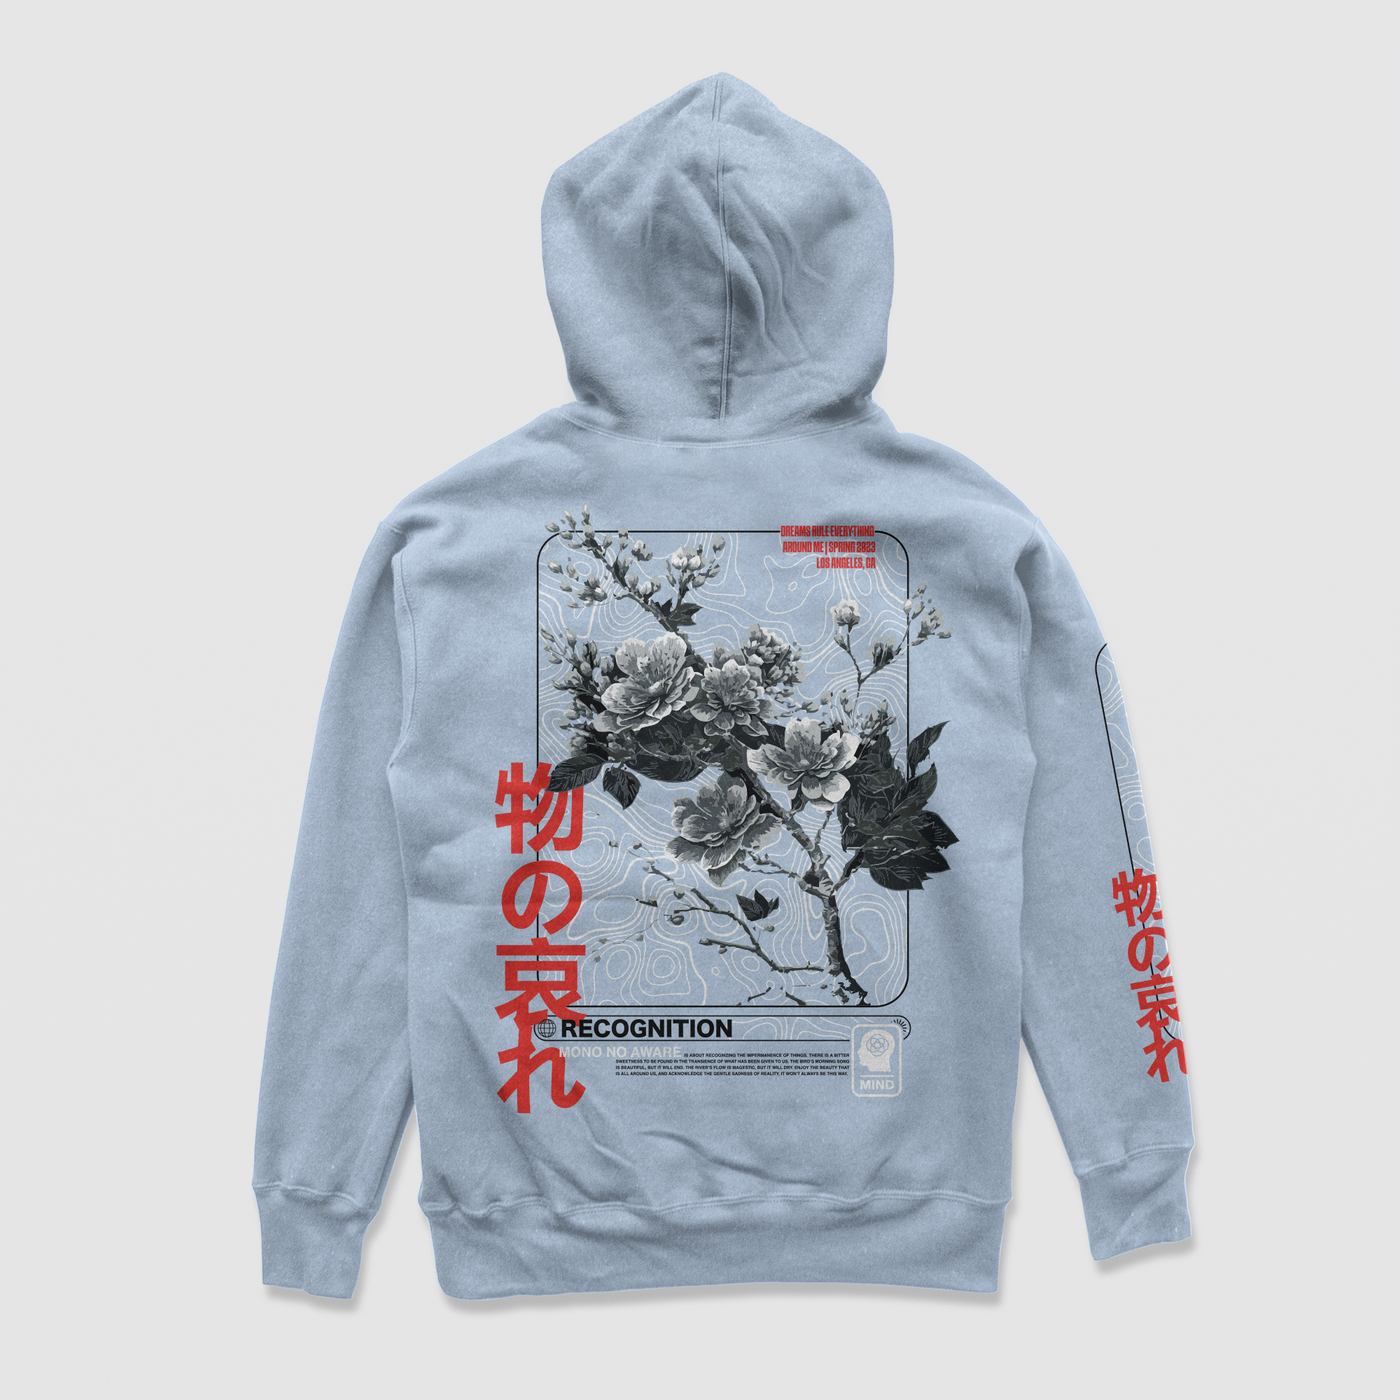 "Mono No Aware" HoodieMono-No-Aware -- The impermanence of things

A Japanese term for the awareness of impermanence of things, and both a transient gentle sadness or wistfulness at theirDREAM Clothing 